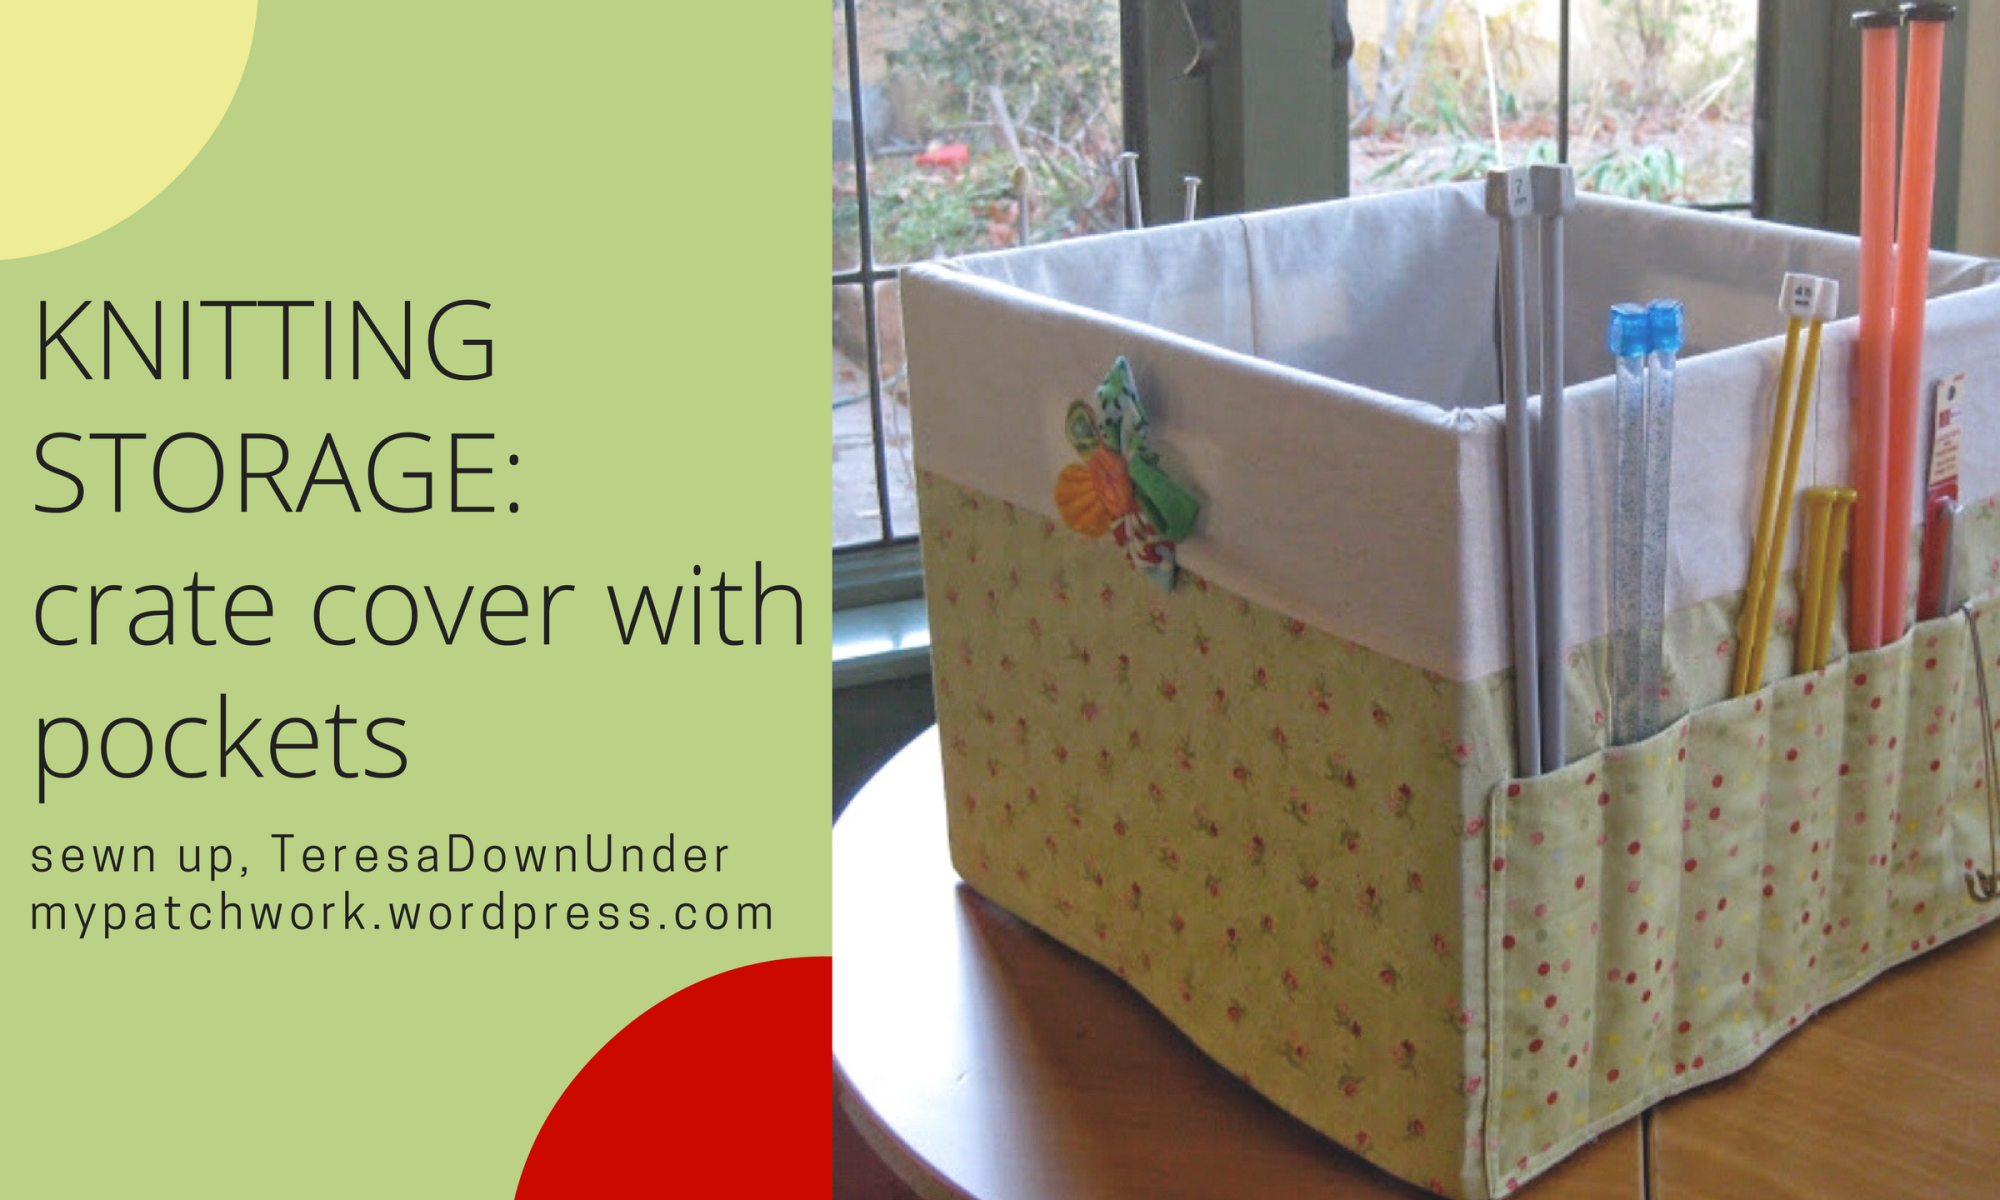 Knitting storage: crate cover with pockets tutorial – Sewn Up